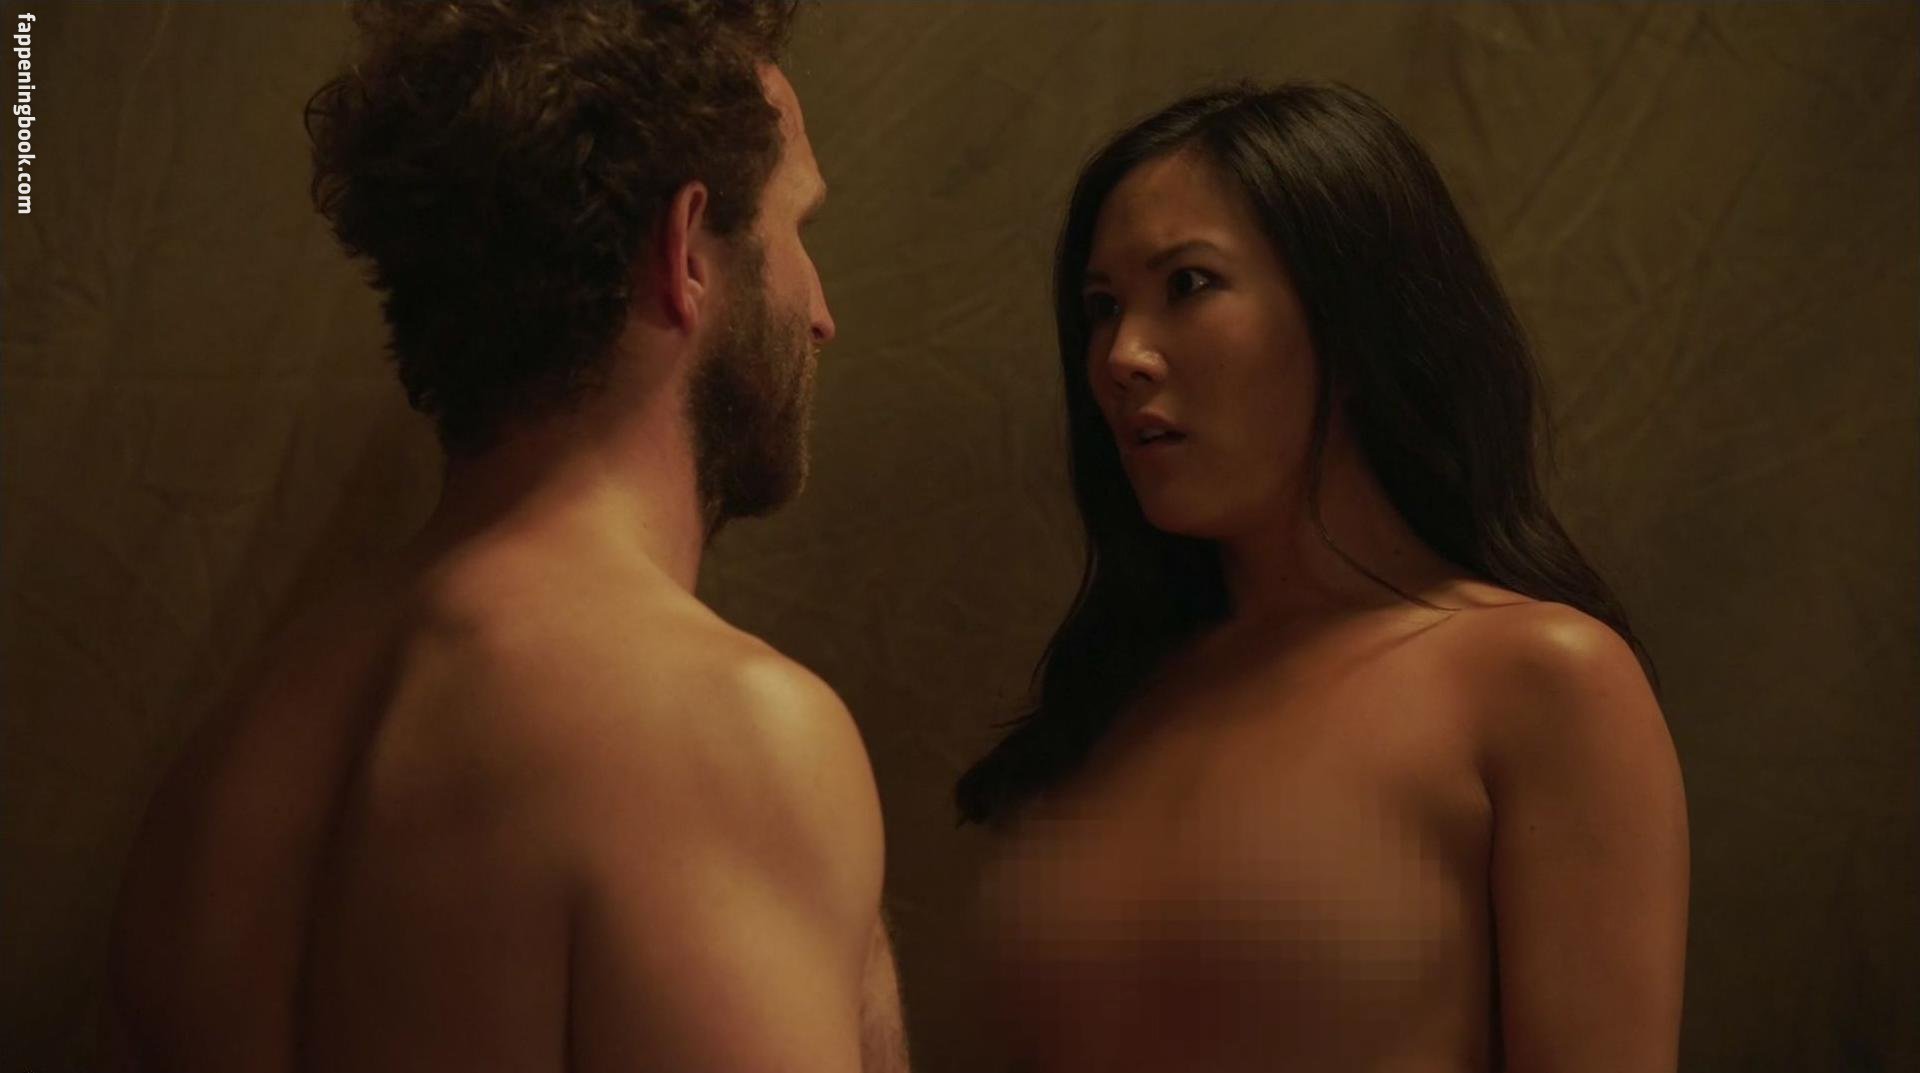 Ally Maki Nude, The Fappening - Photo #21617 - FappeningBook.